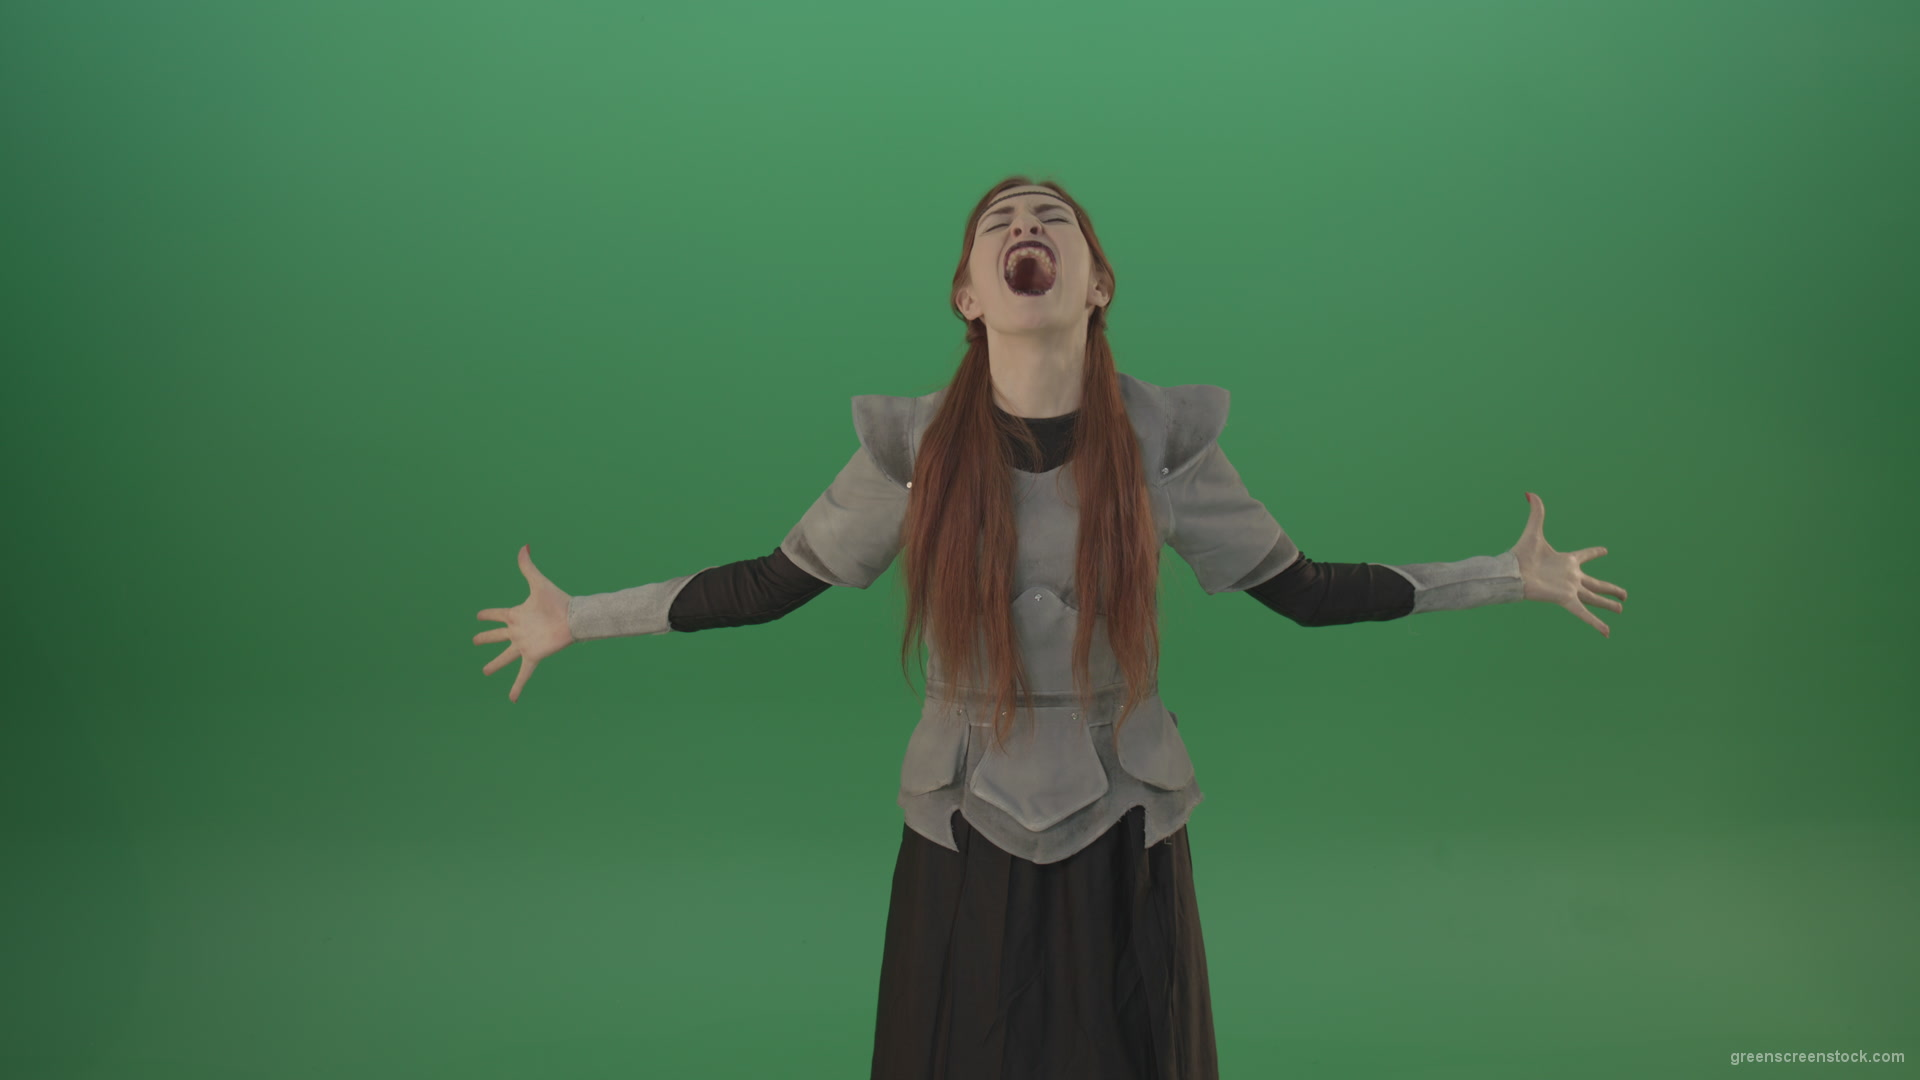 Cried-warrior-girl-releases-all-her-energy-cosplay-on-a-green-background_008 Green Screen Stock